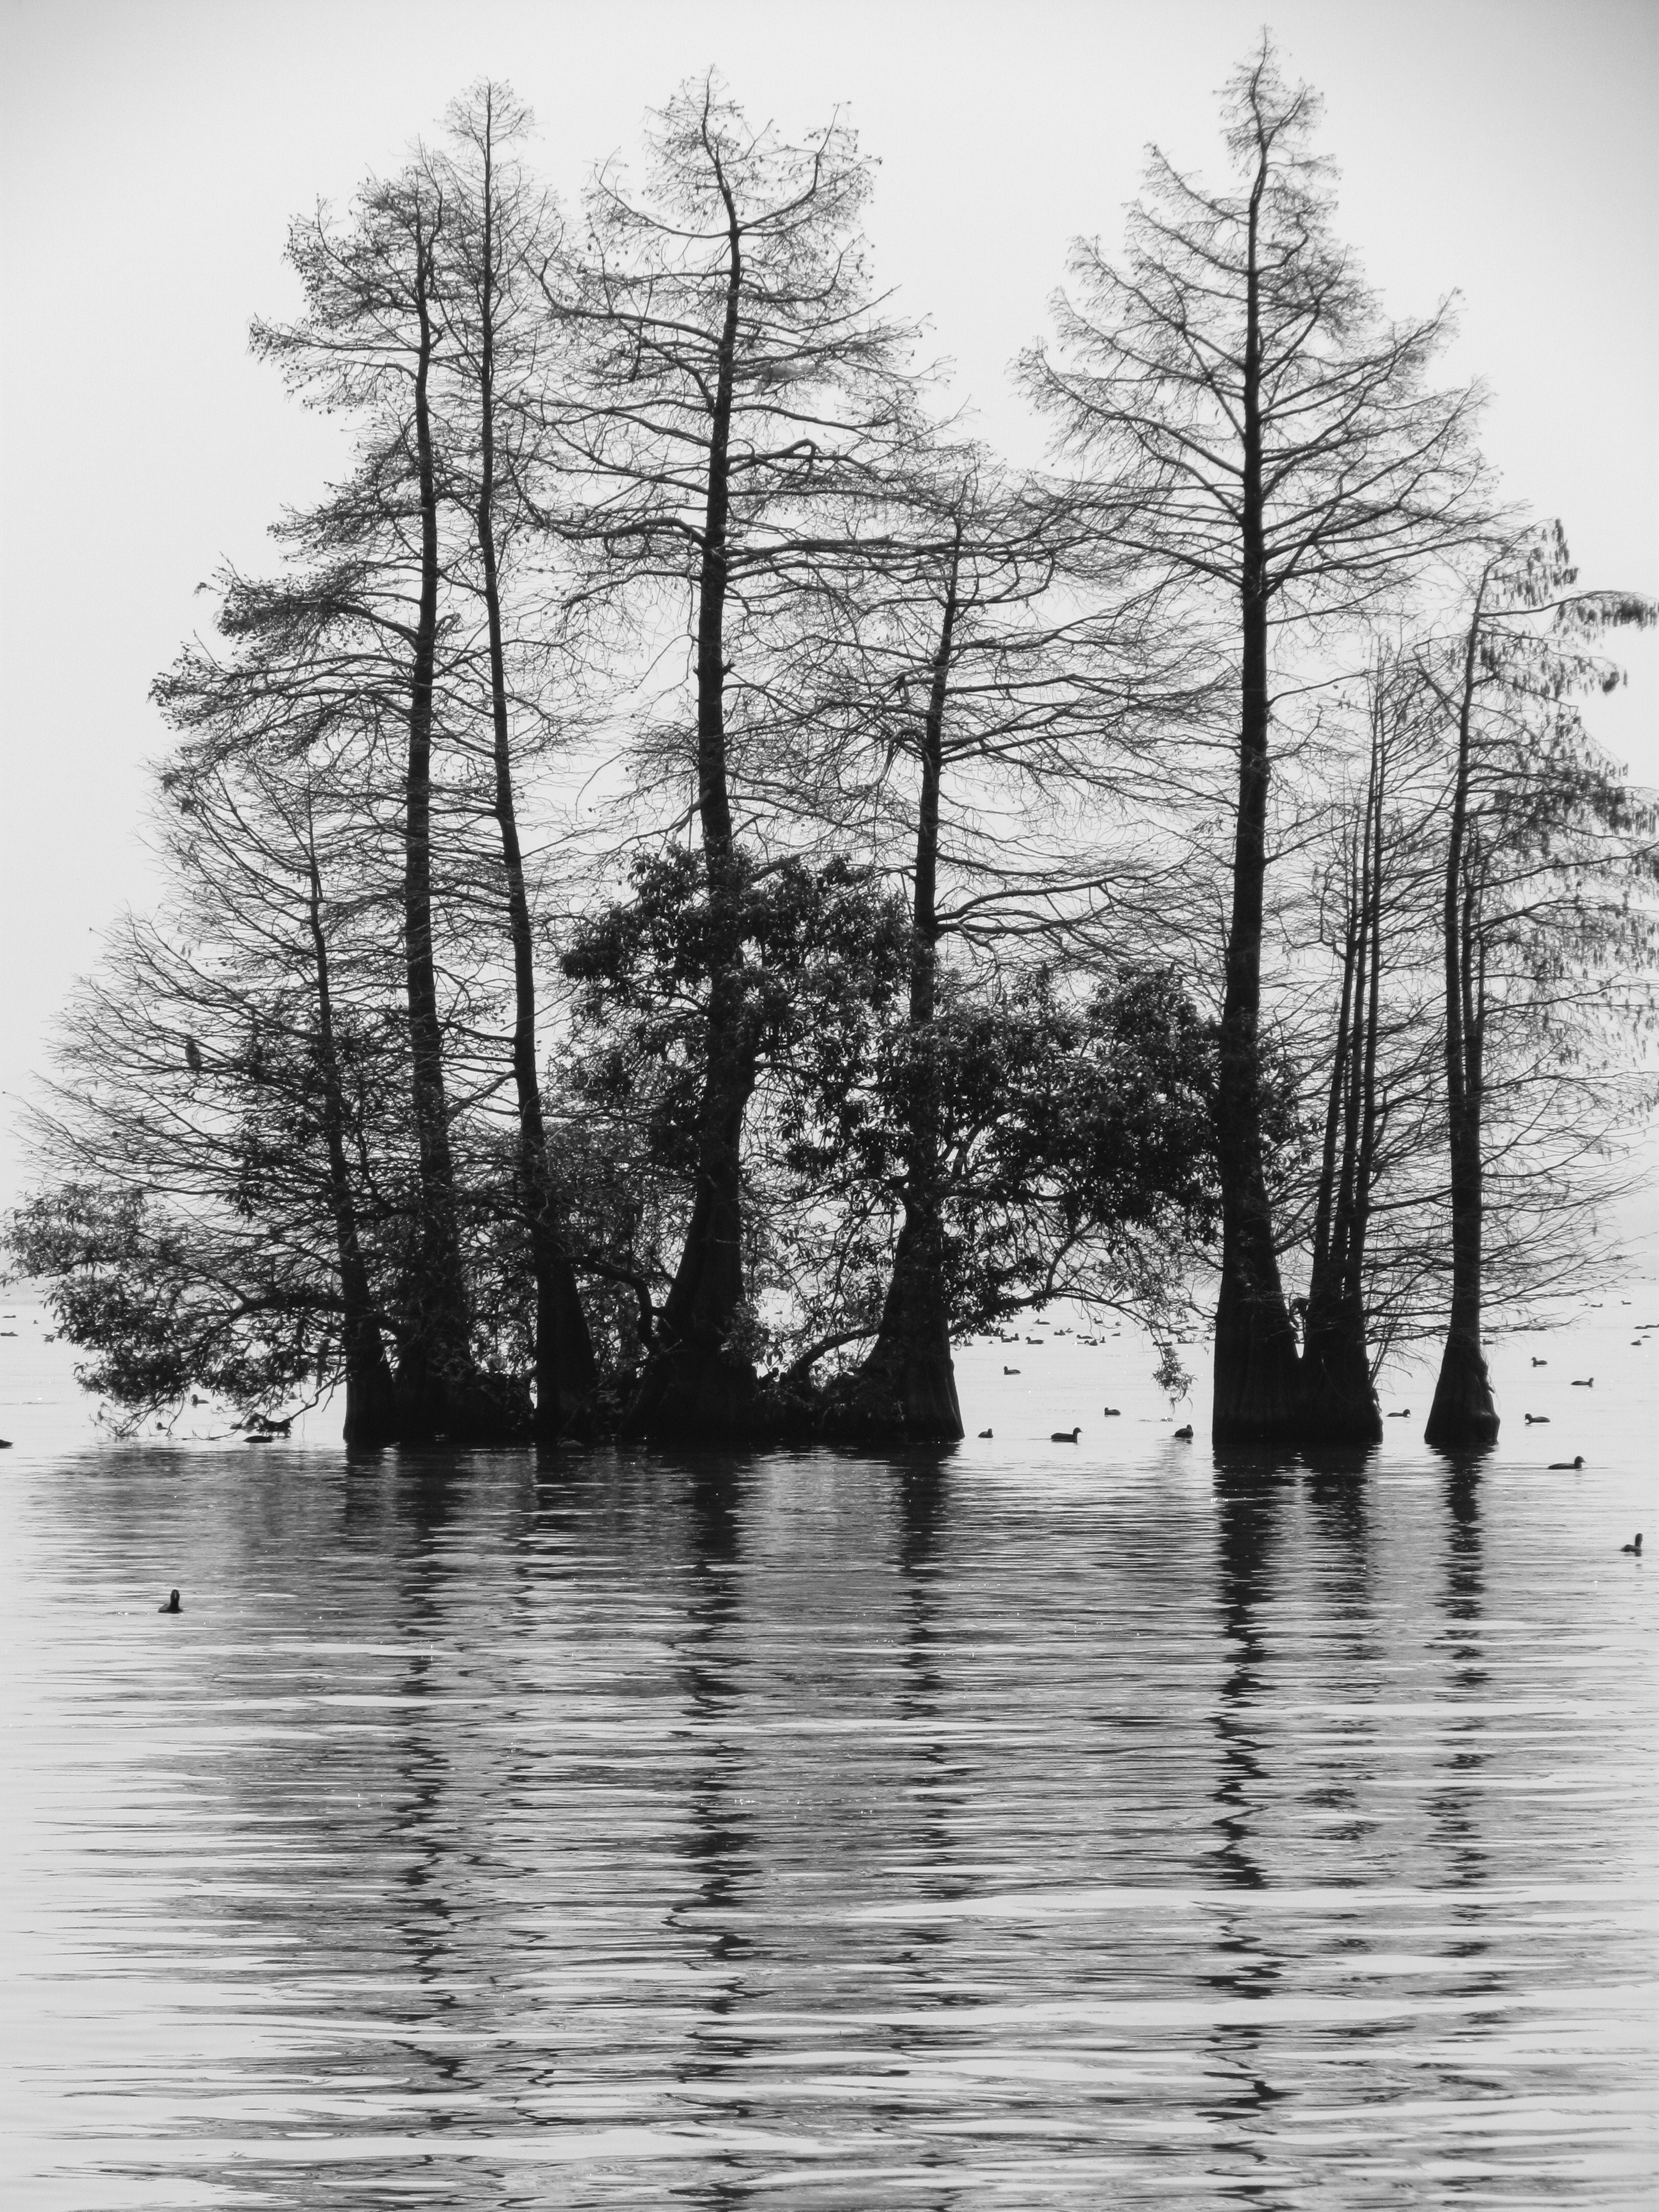 General 3000x4000 silhouette low saturation trees water reflection portrait display monochrome